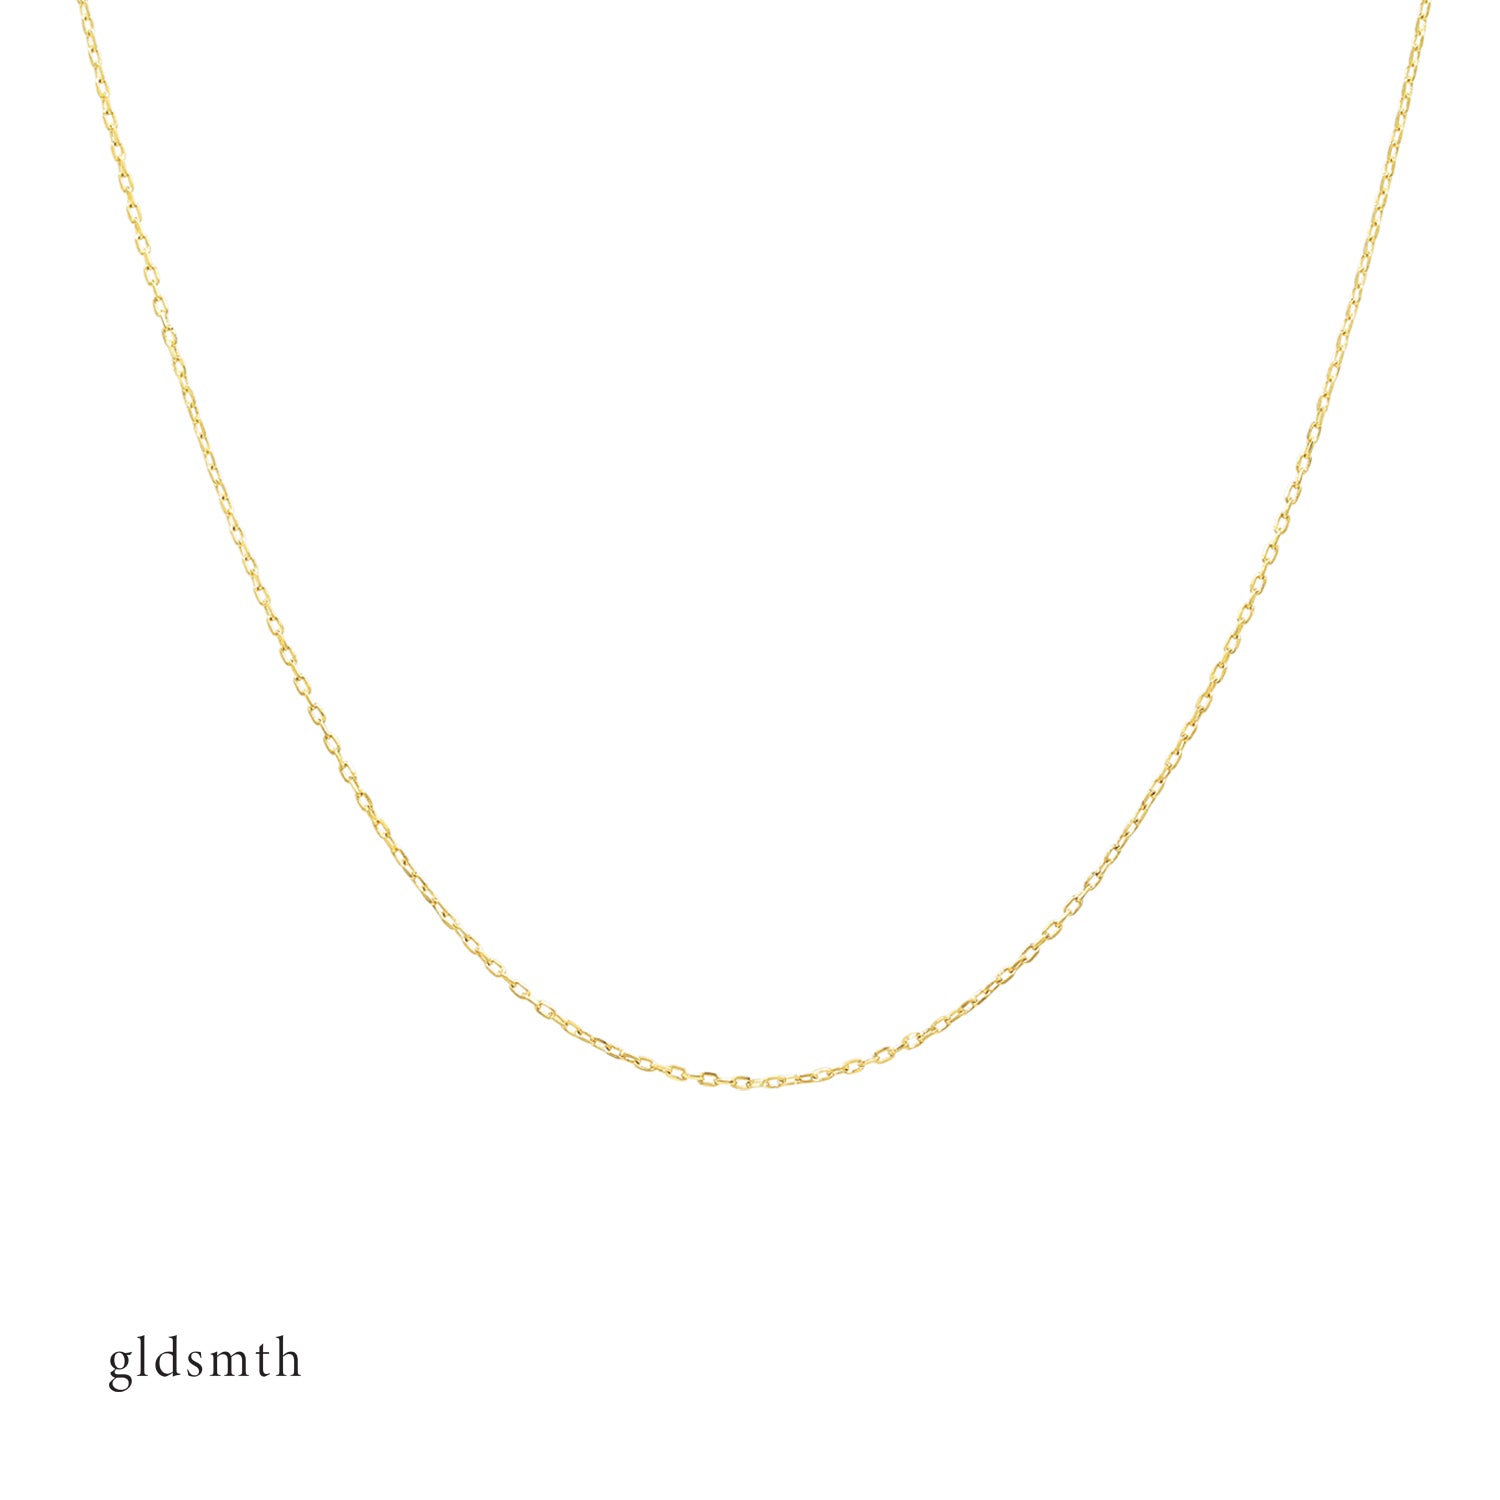 Handcrafted 14K solid yellow gold necklace chain